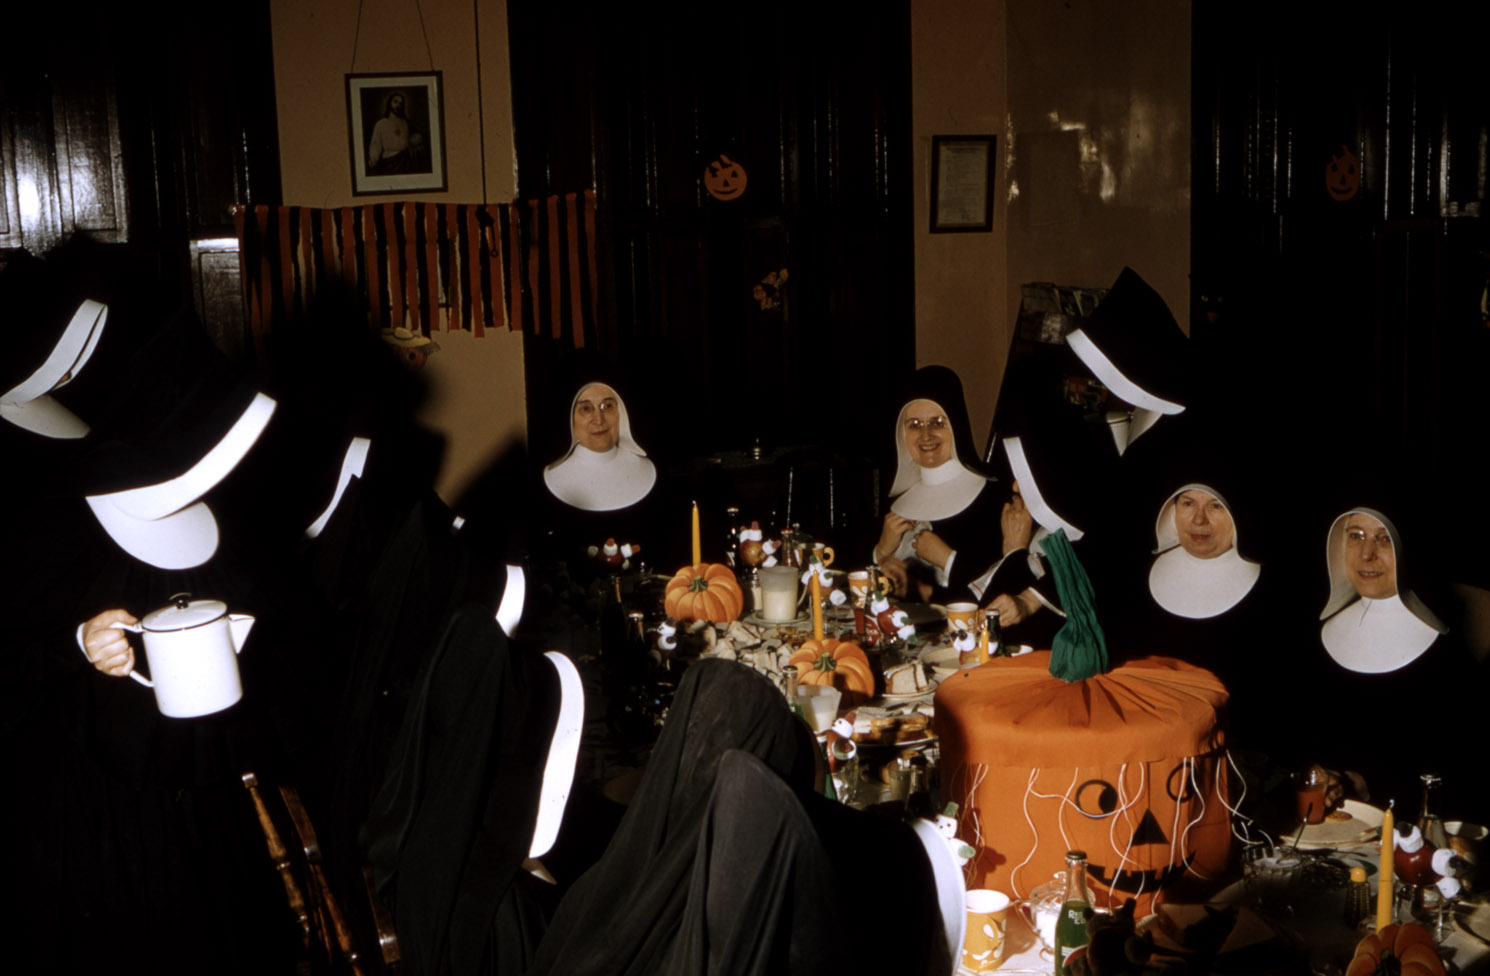 communityalbums - Sisters of Charity-Halifax at table decorated for Halloween supper, Saint Anne's Convent, Glace Bay, Nova Scotia.